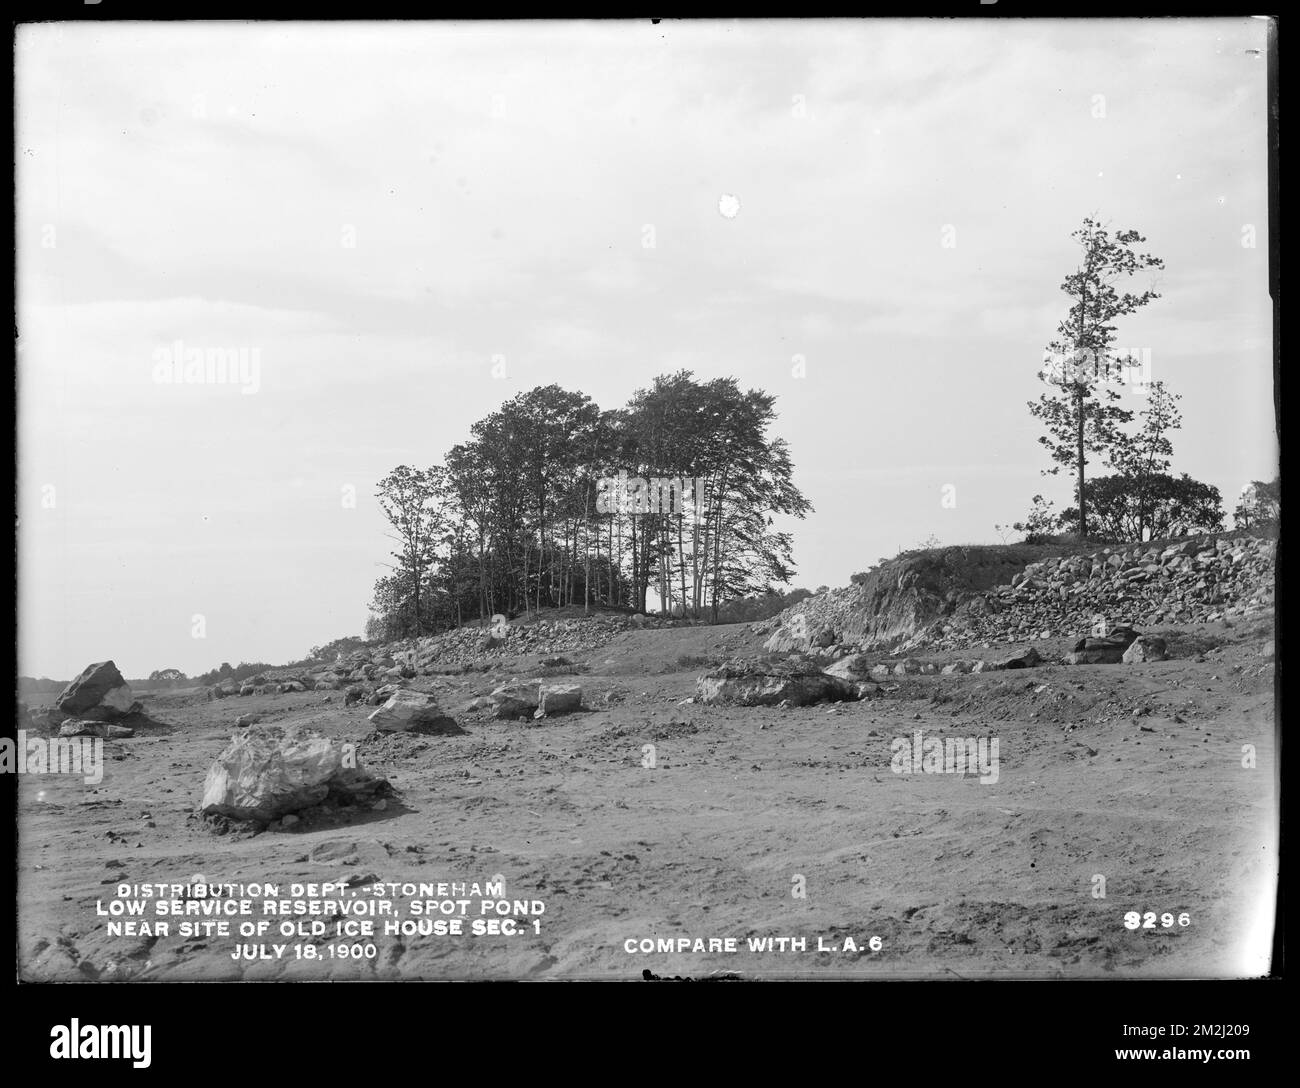 Distribution Department, Low Service Spot Pond Reservoir, near site of old icehouse, Section 1 (compare with Landscape Architects' photograph No. 6), Stoneham, Mass., Jul. 18, 1900 , waterworks, reservoirs water distribution structures, construction sites Stock Photo